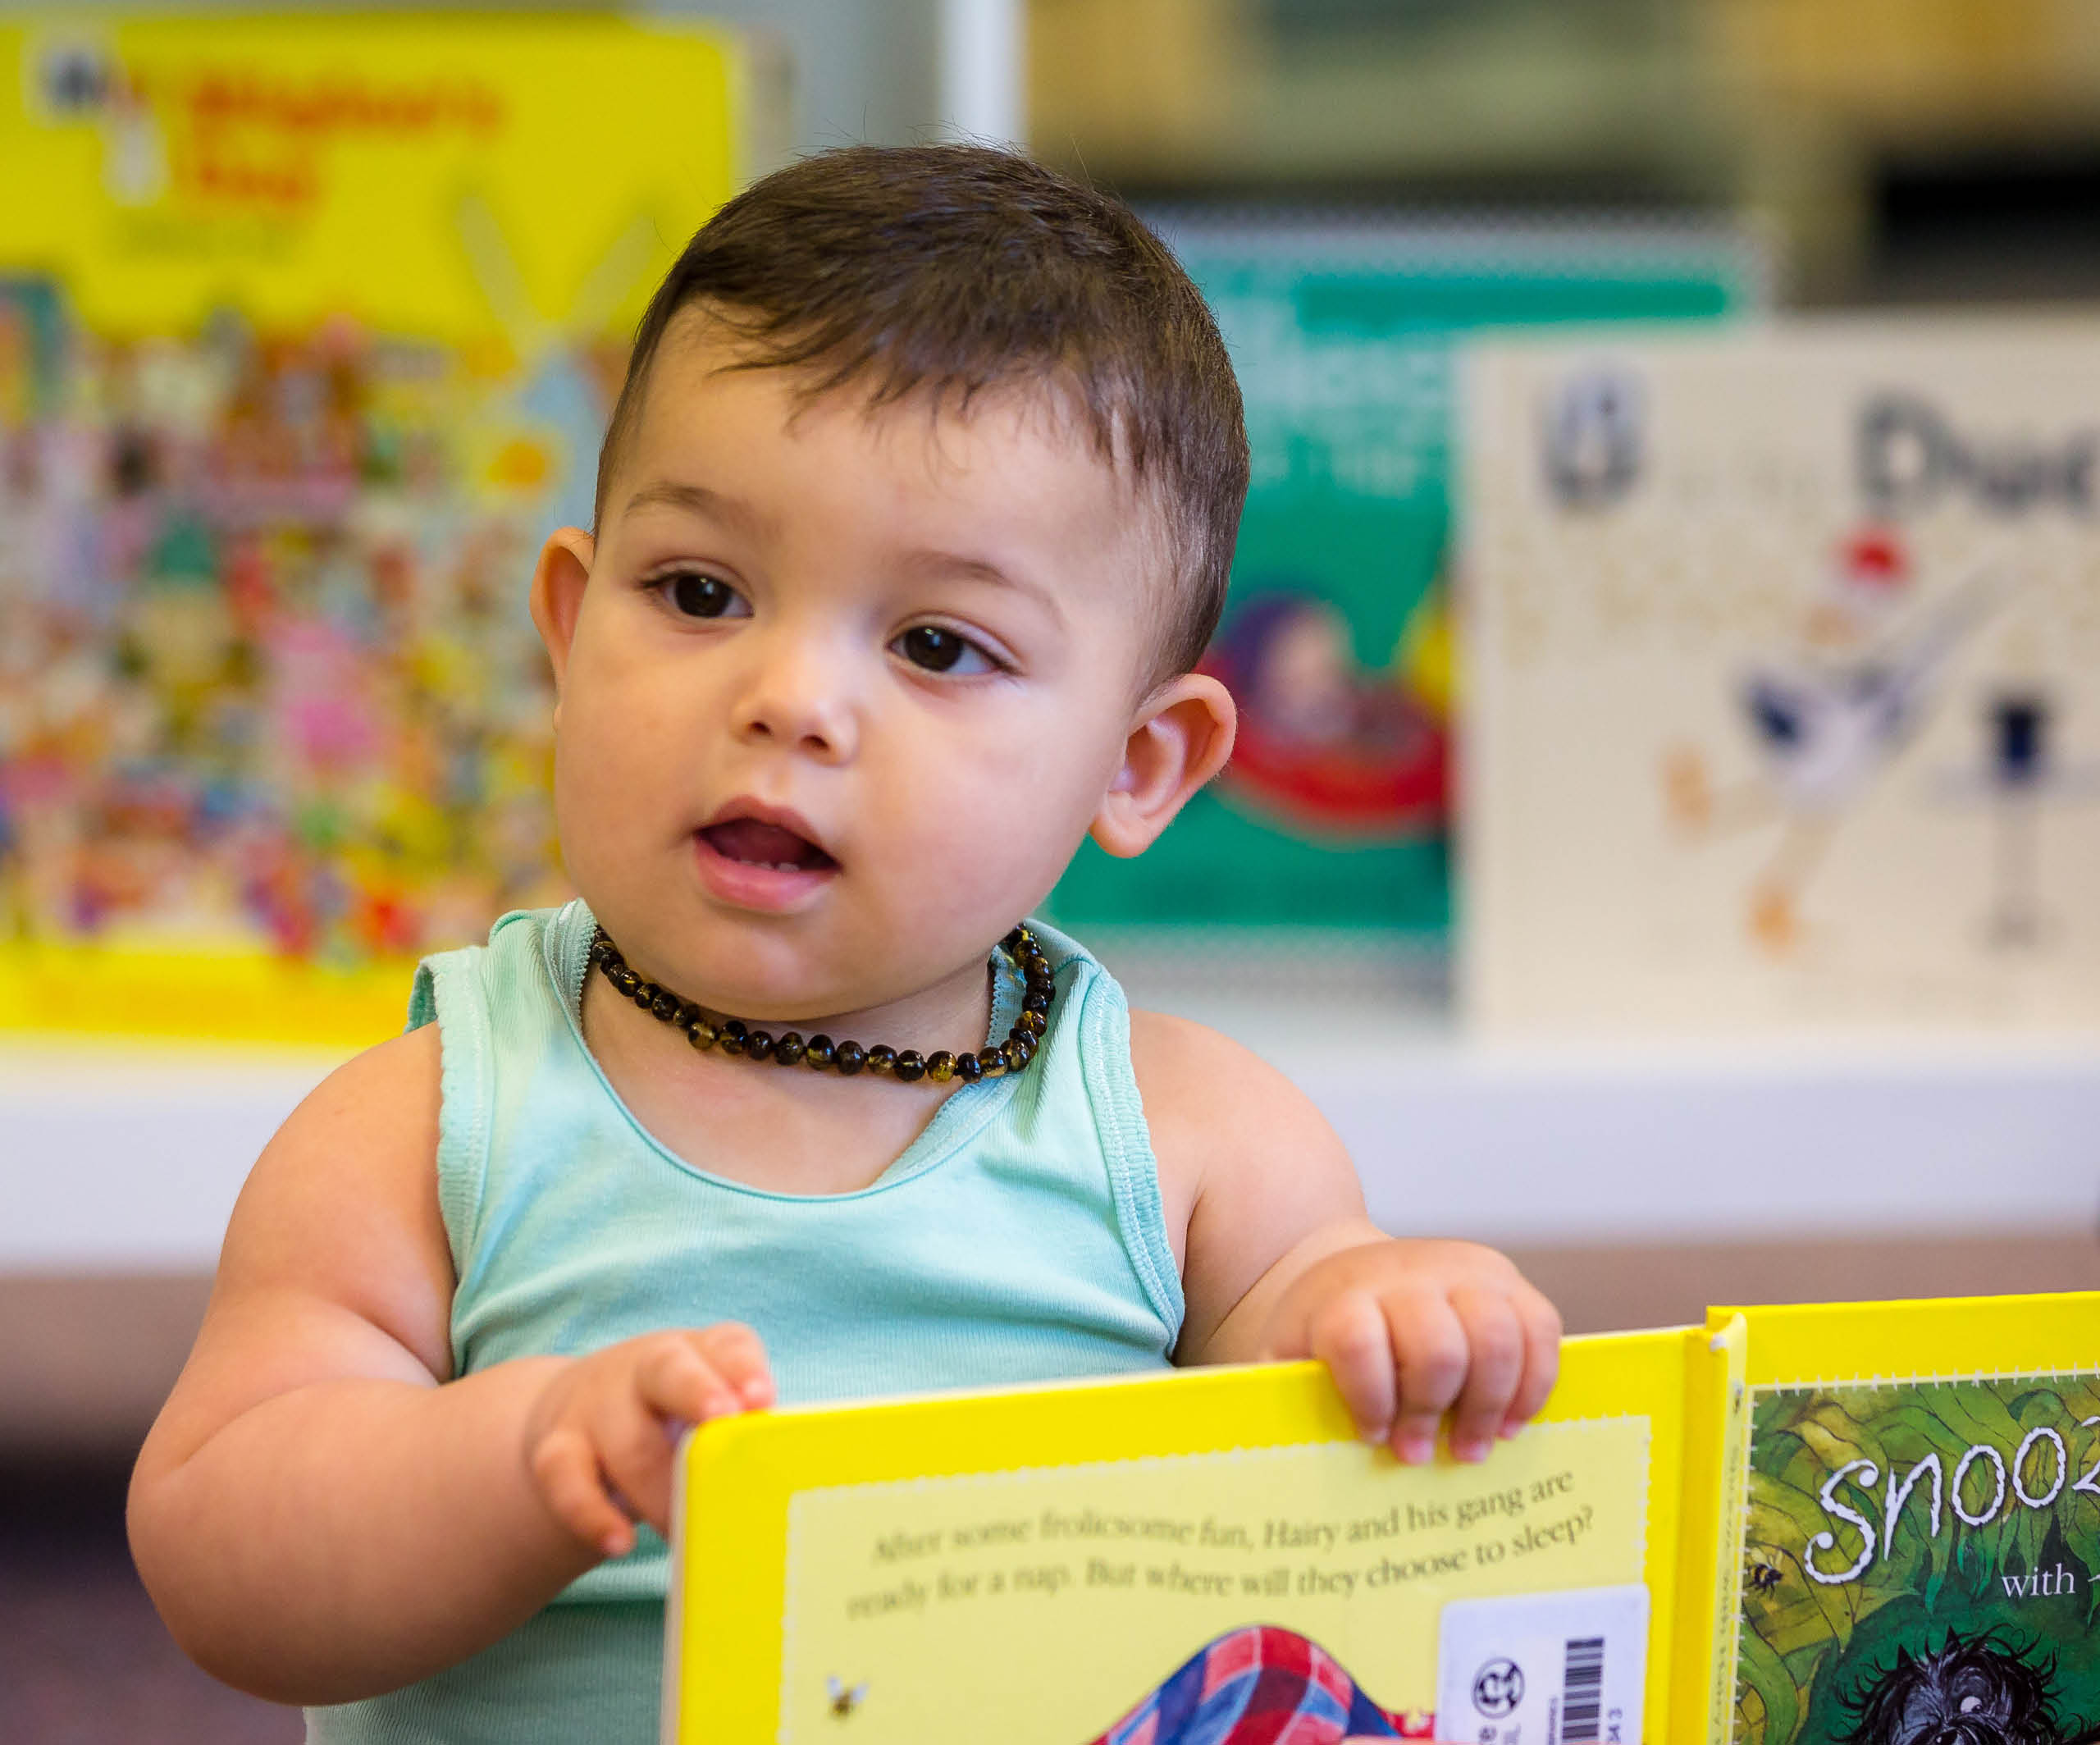 Rhymetime is held at Cronulla Library on Wednesday mornings at 11am during school terms. Suitable for babies aged 0 to 24 months.